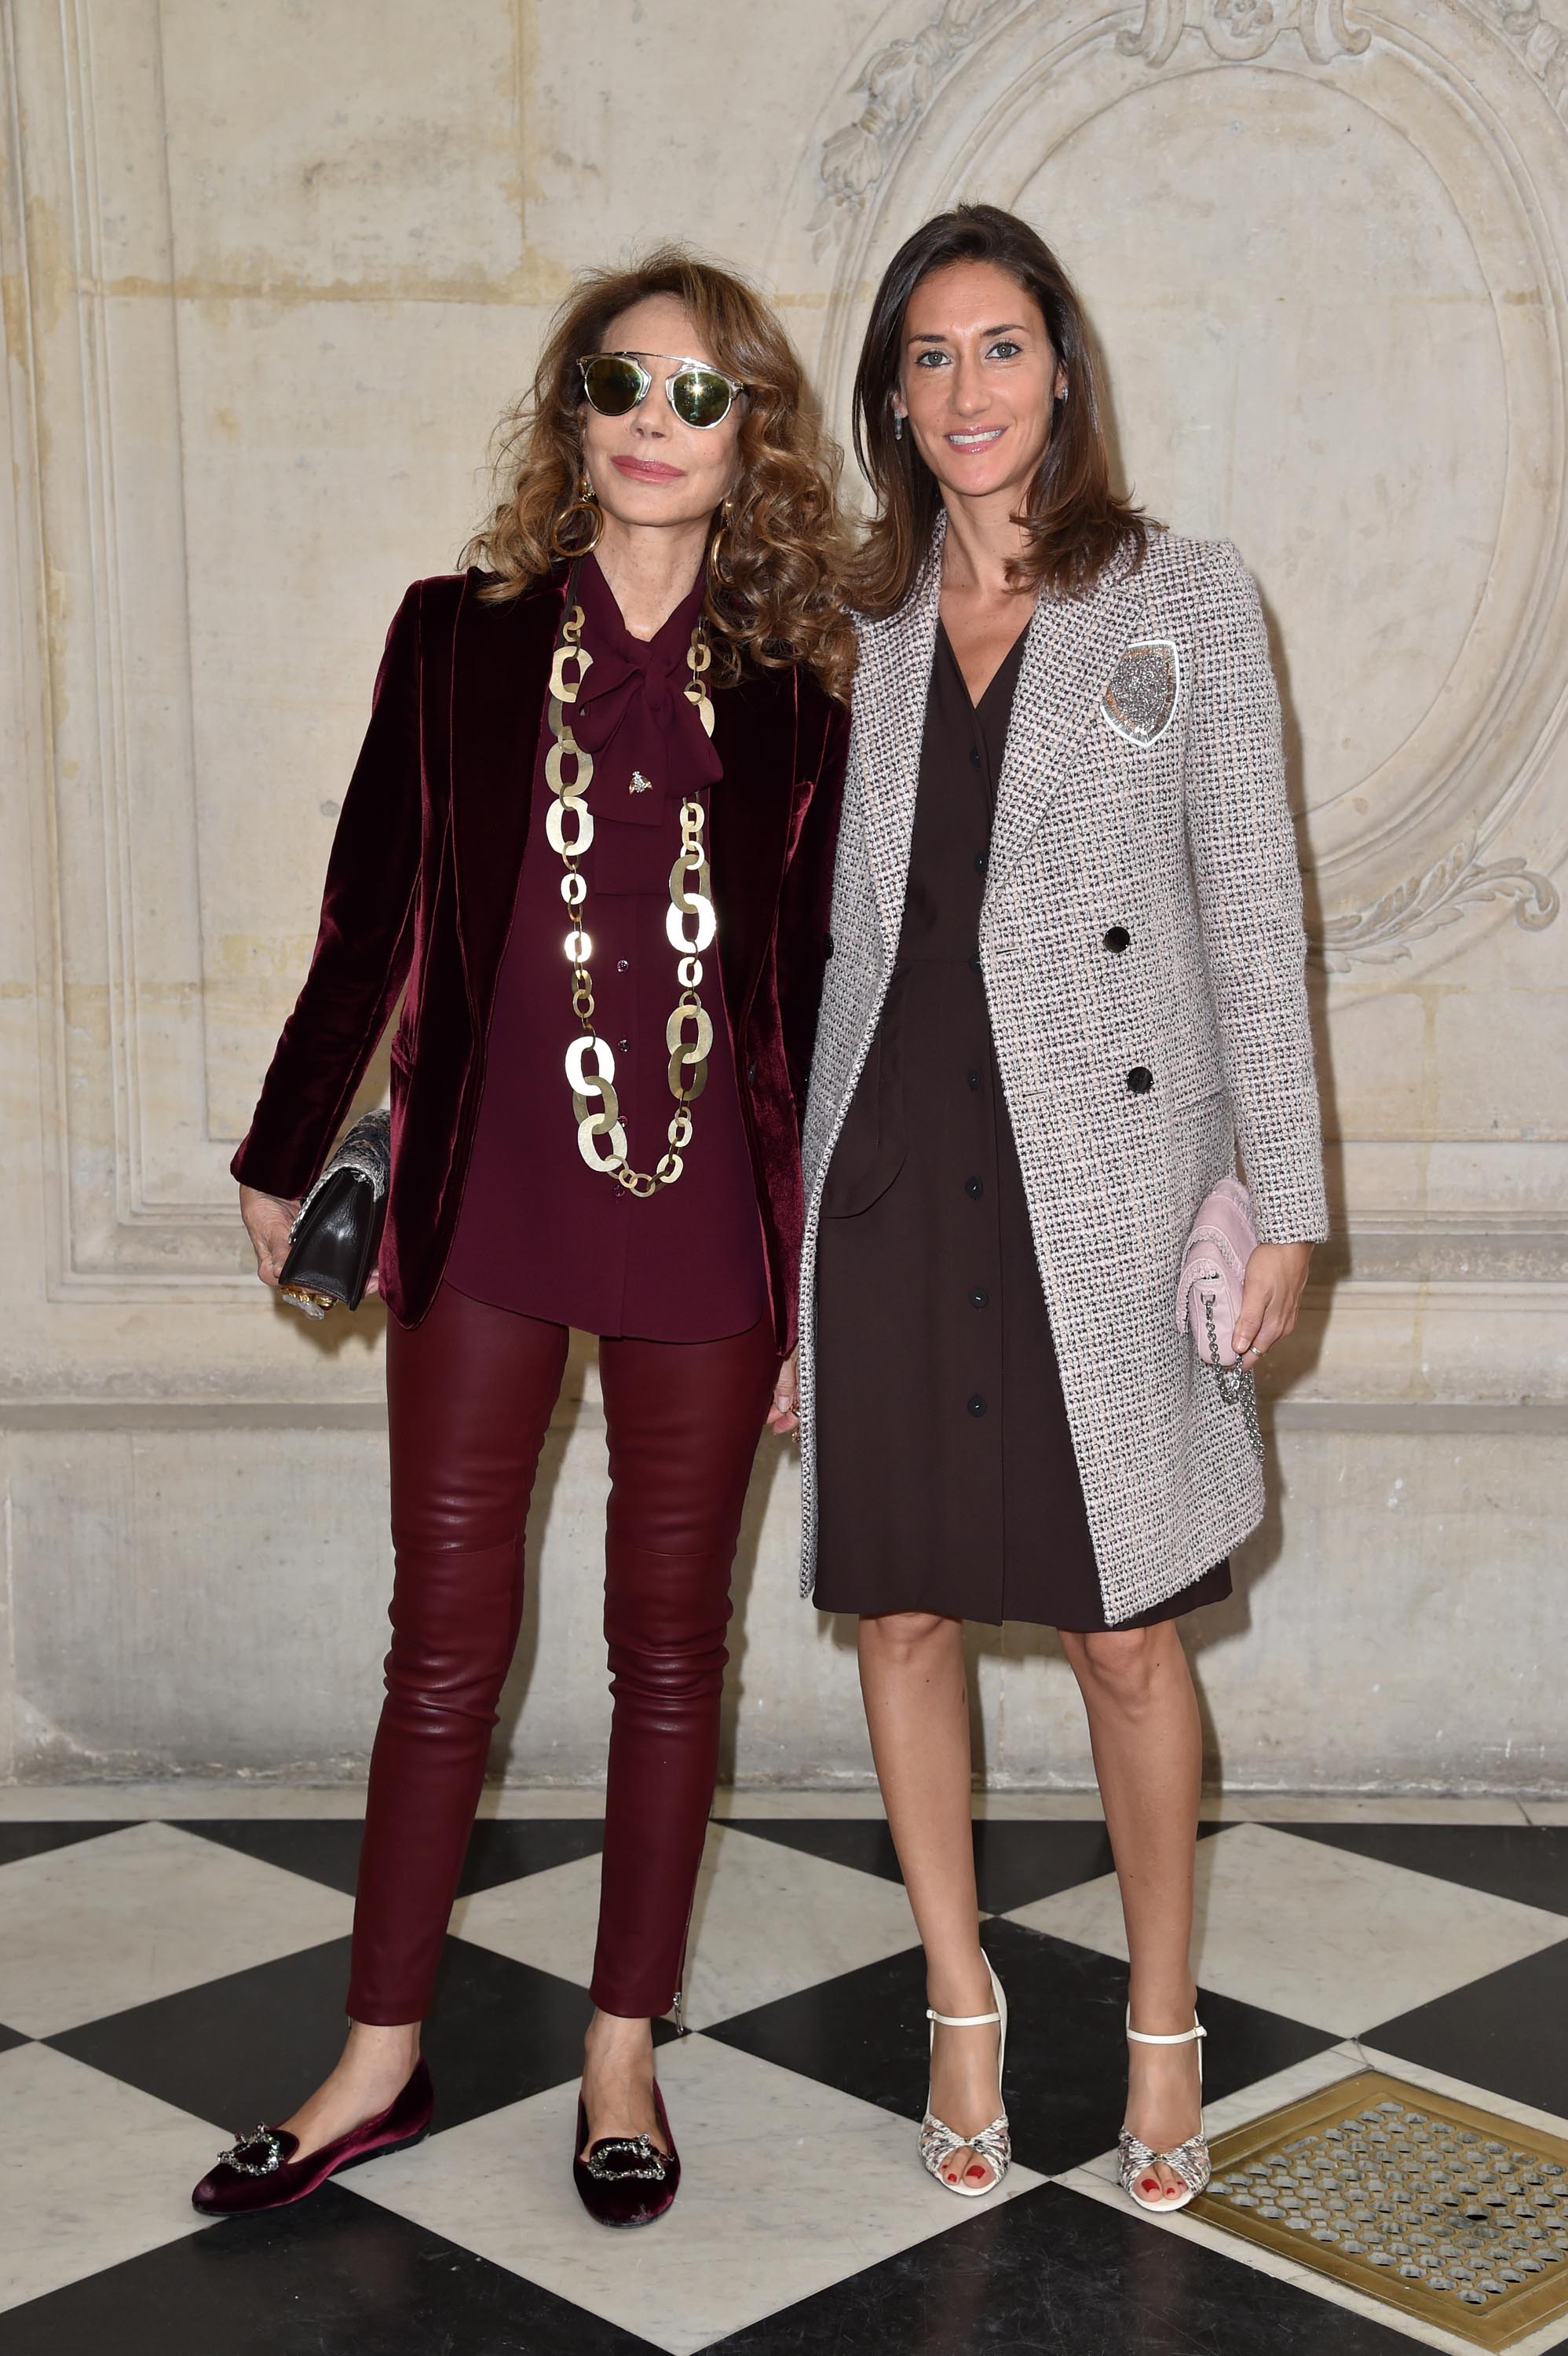 Marisa Berenson attends the Christian Dior show